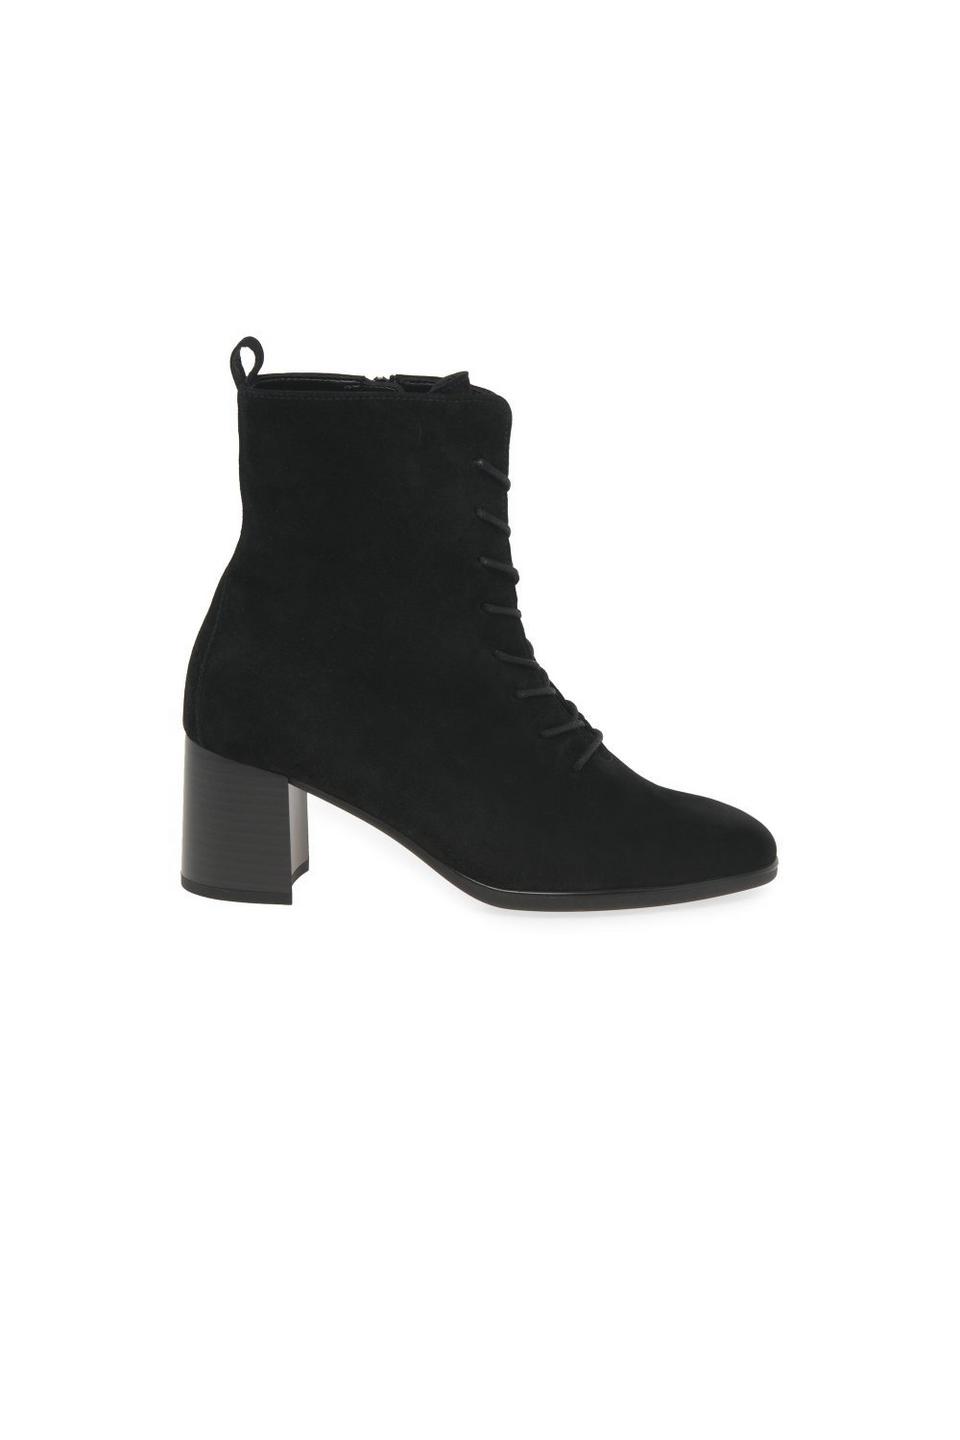 Boots | 'Balfour' Lace Up Ankle Boots | Gabor